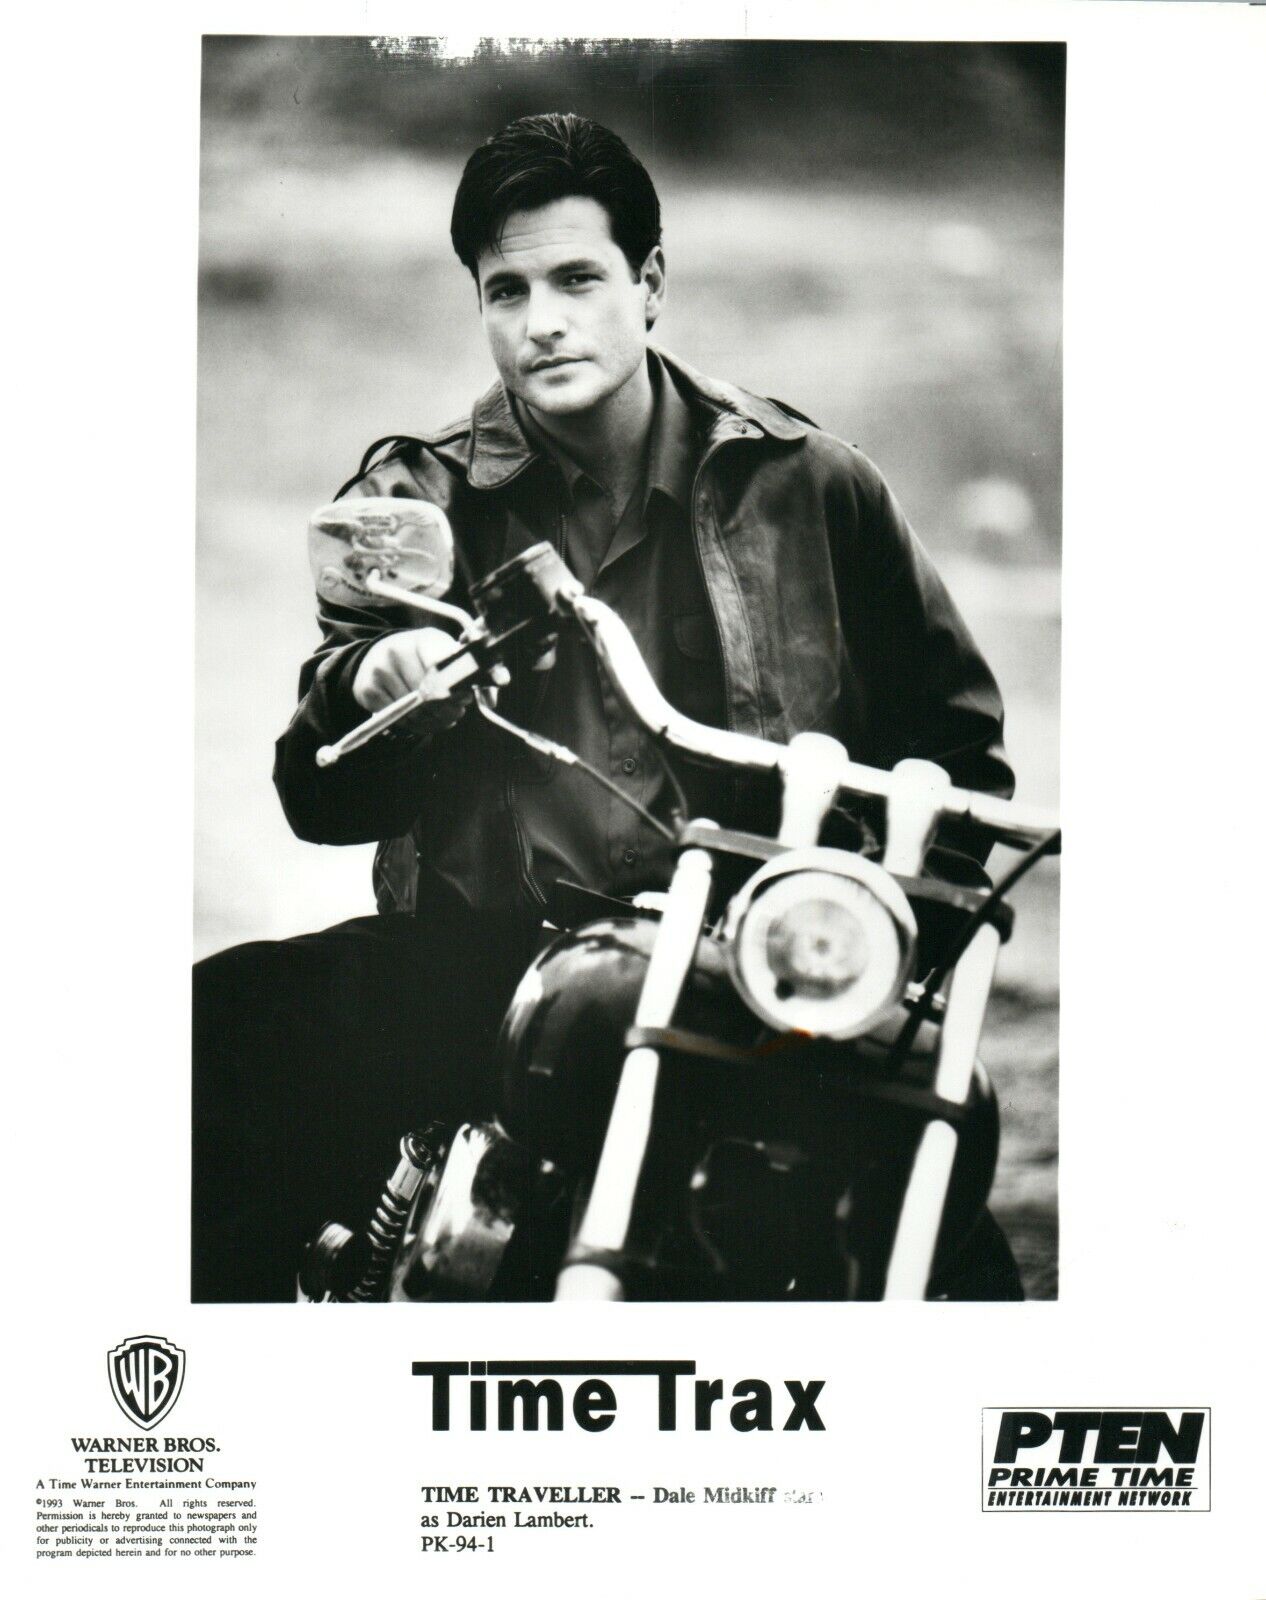 DALE MIDKIFF Actor 1993 Movie TIME TRAX 8x10 Promo News Photo Poster painting Warner Bros